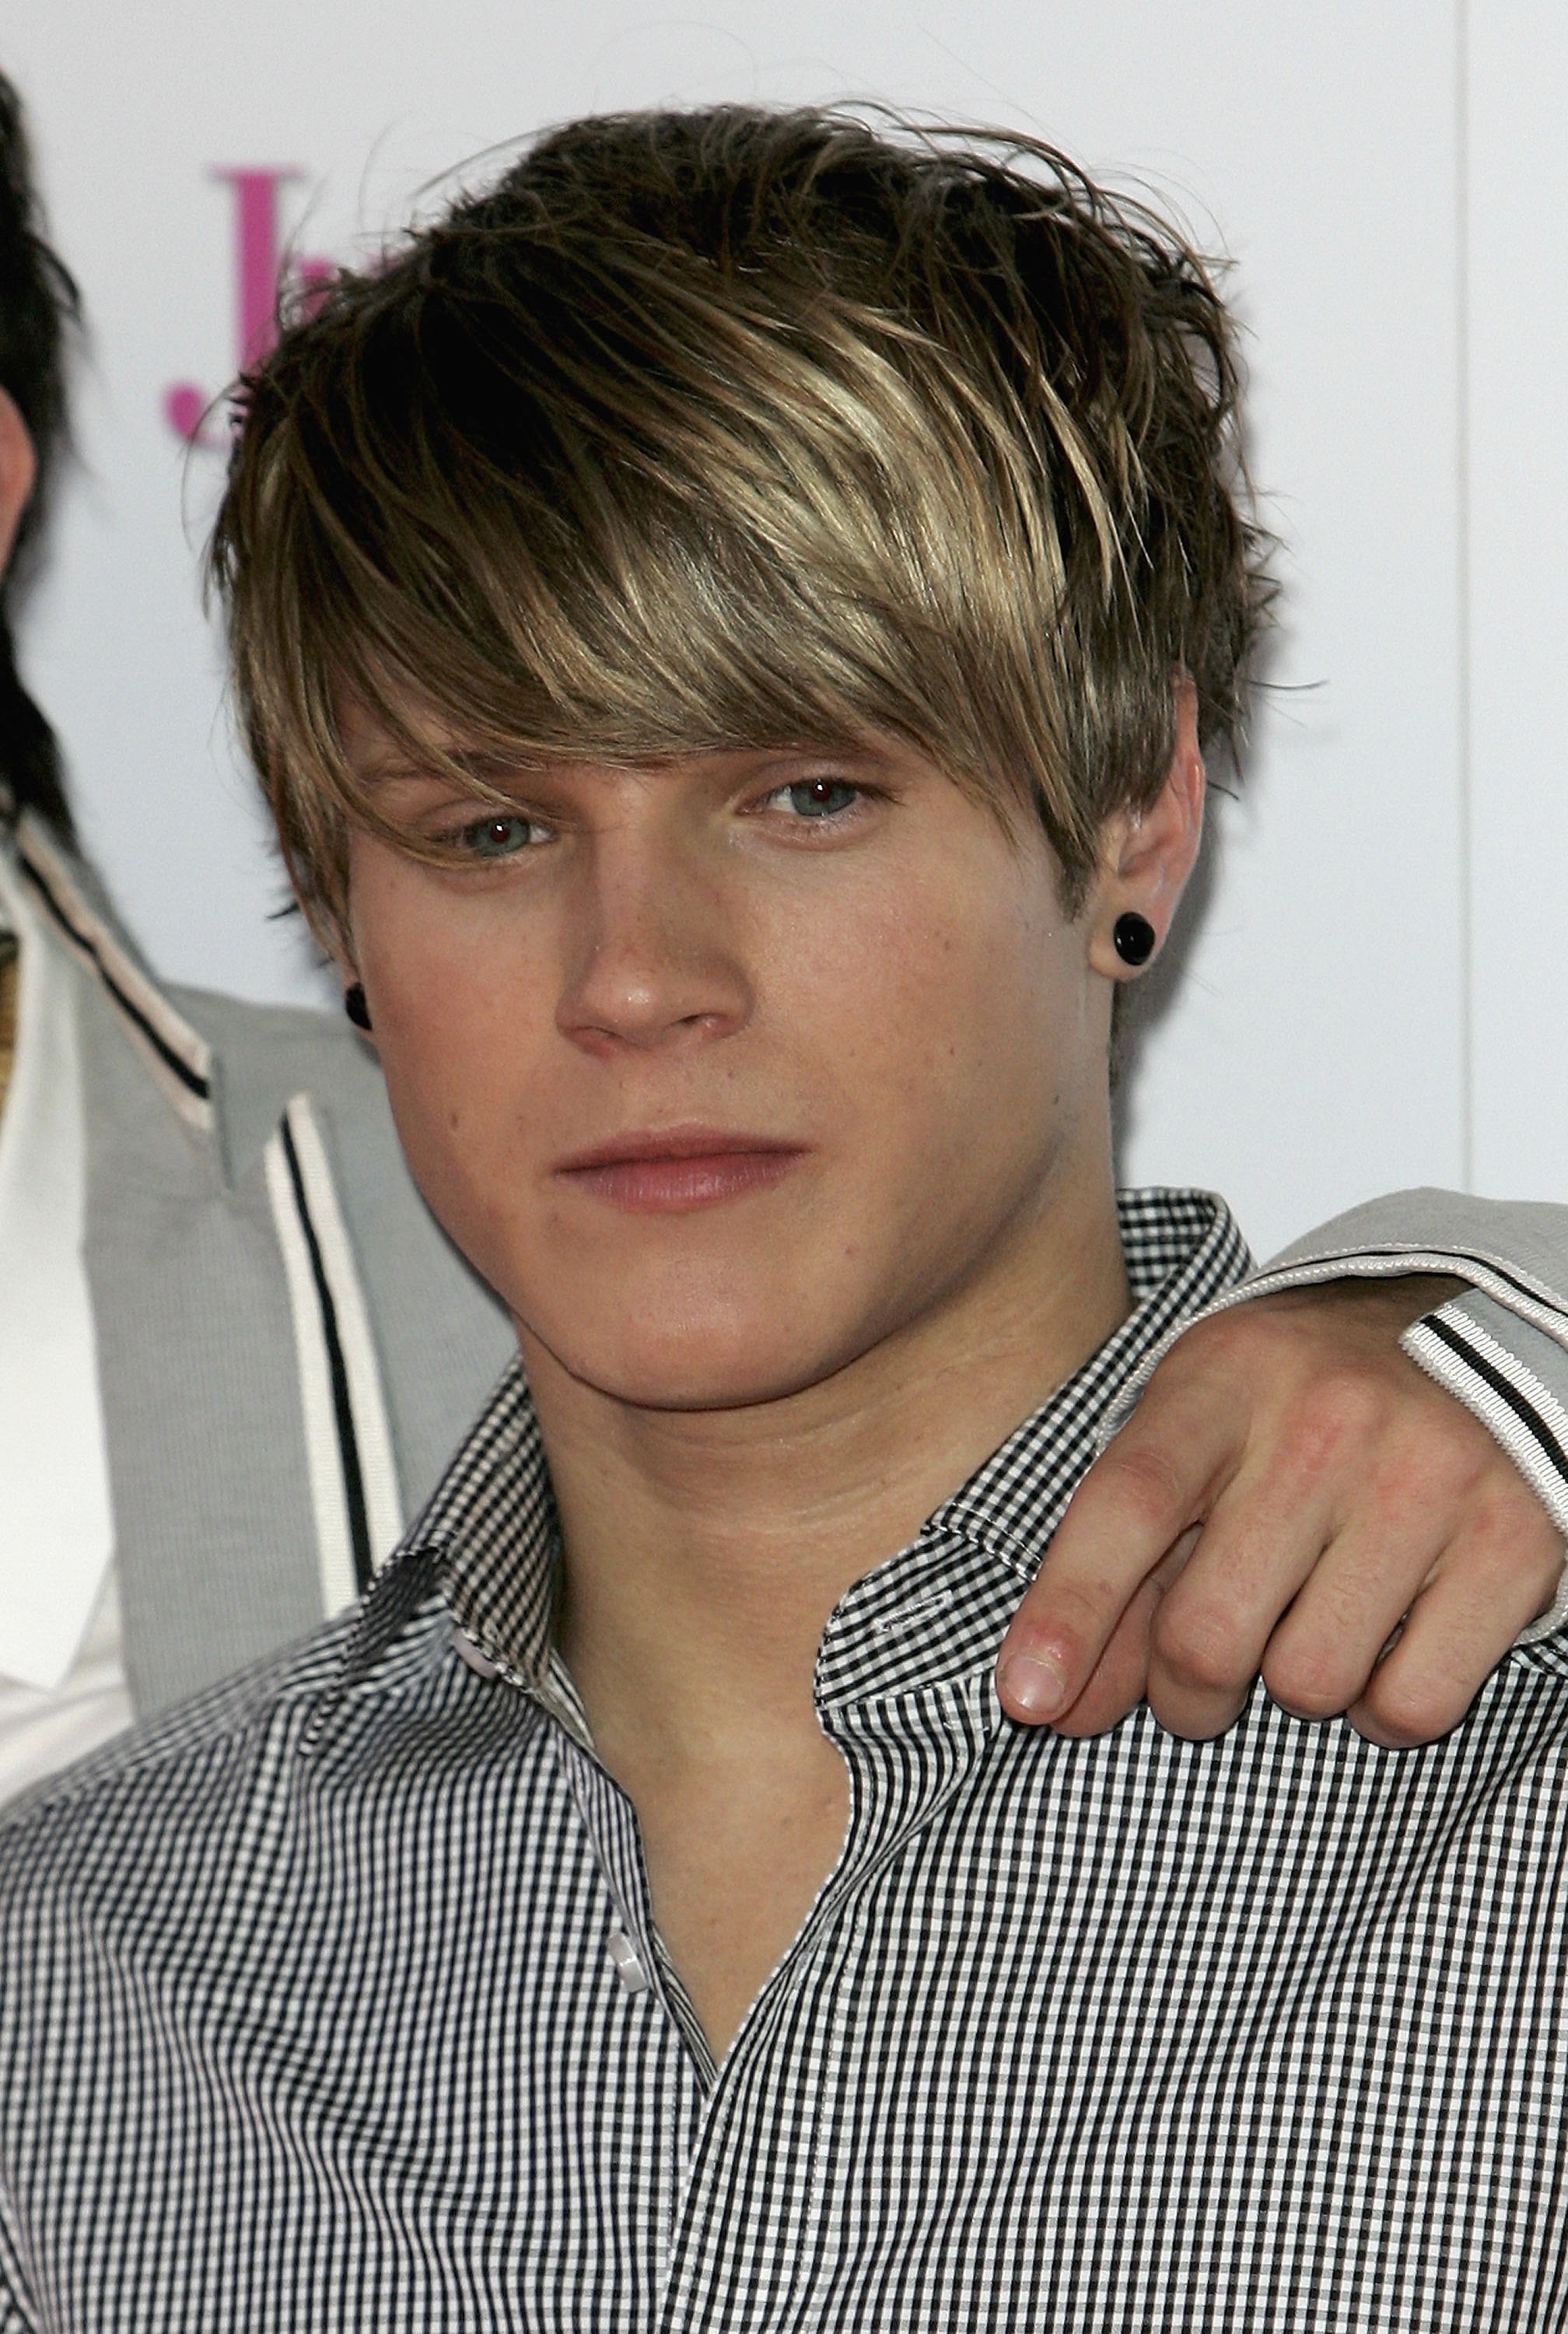 dougie with long side-swept hair